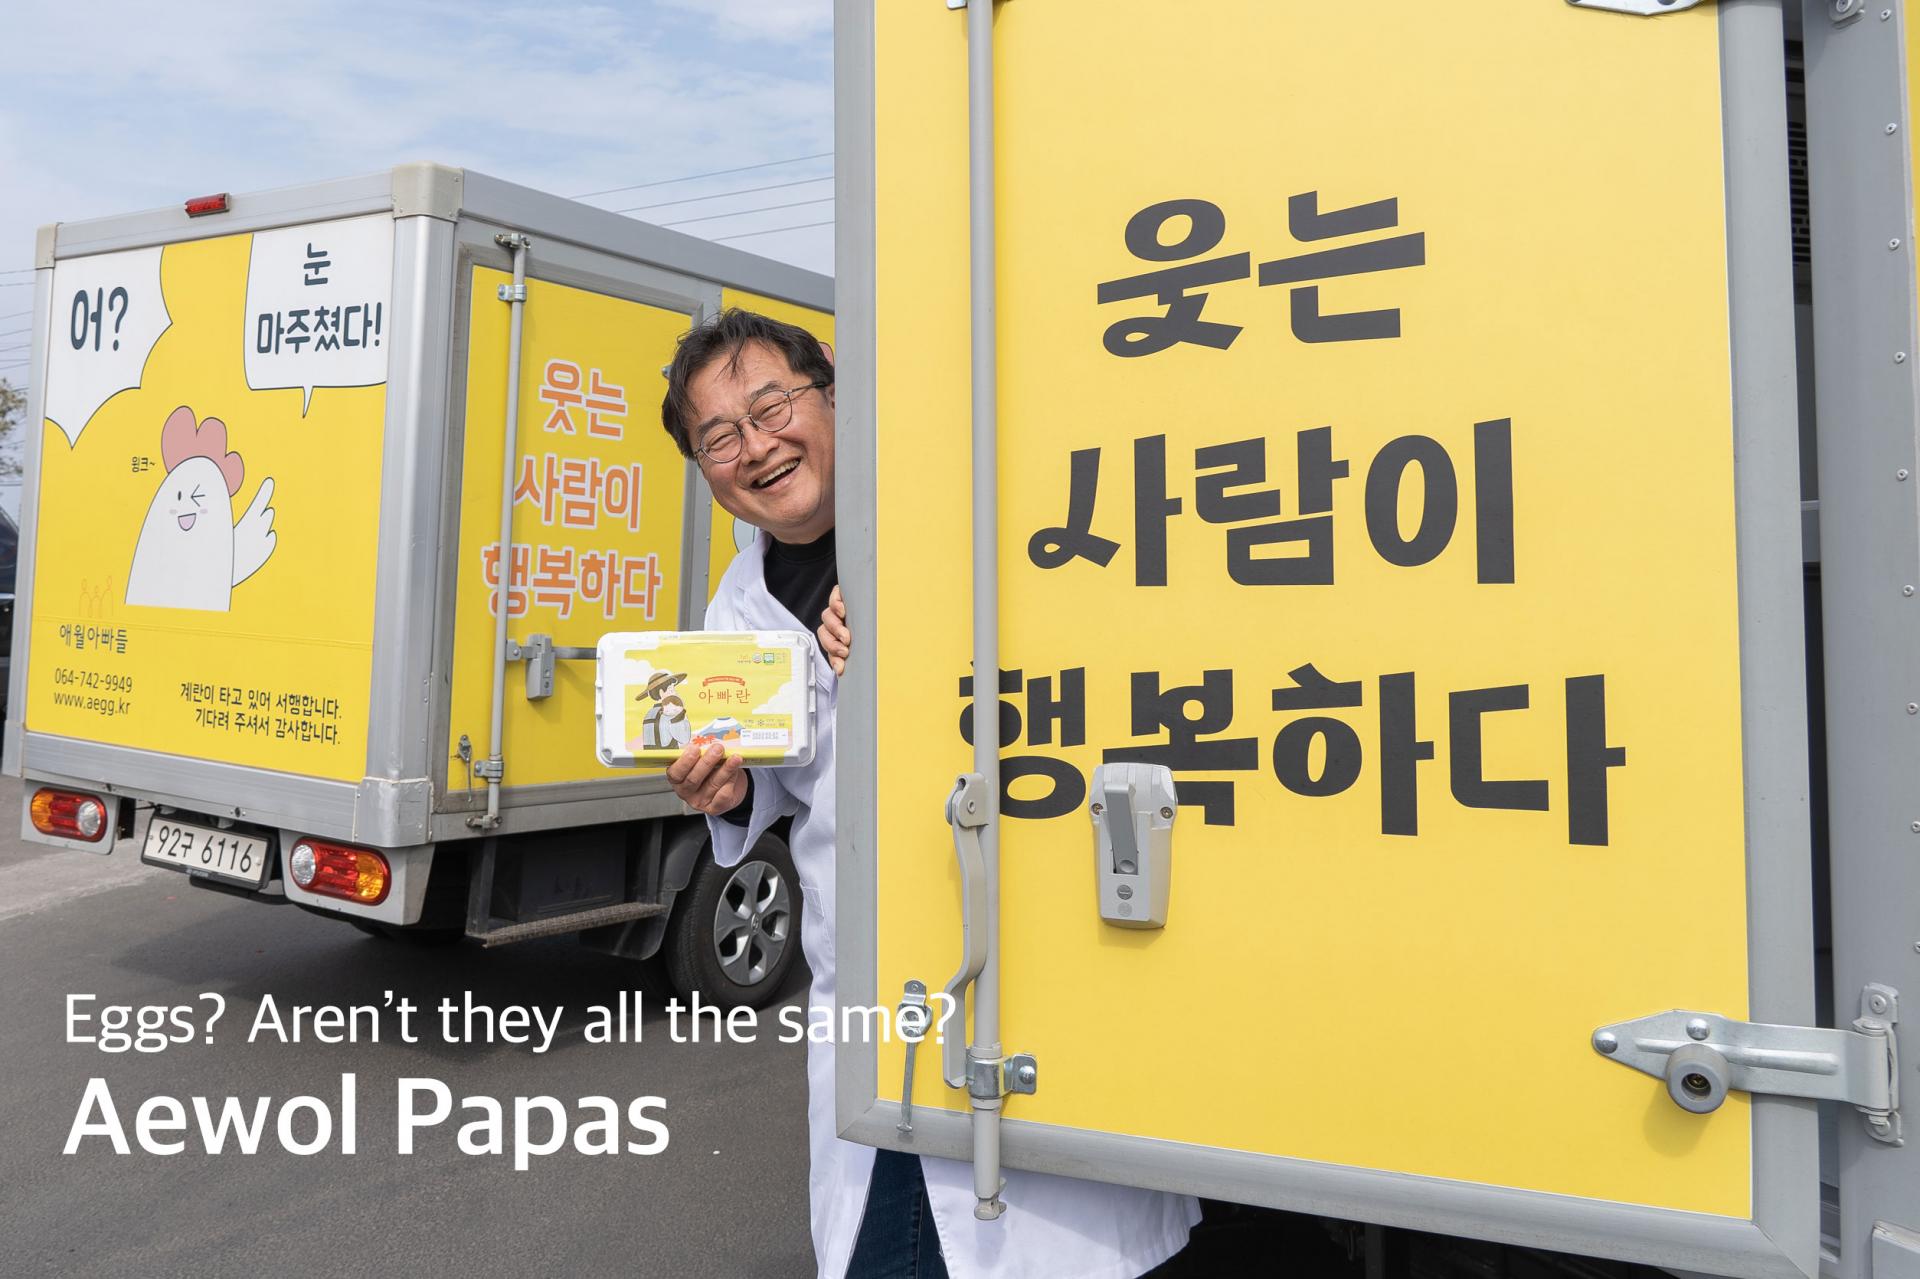 Aewol Papas, delivered straight from a poultry farm in Aewol-eup, Jeju  image